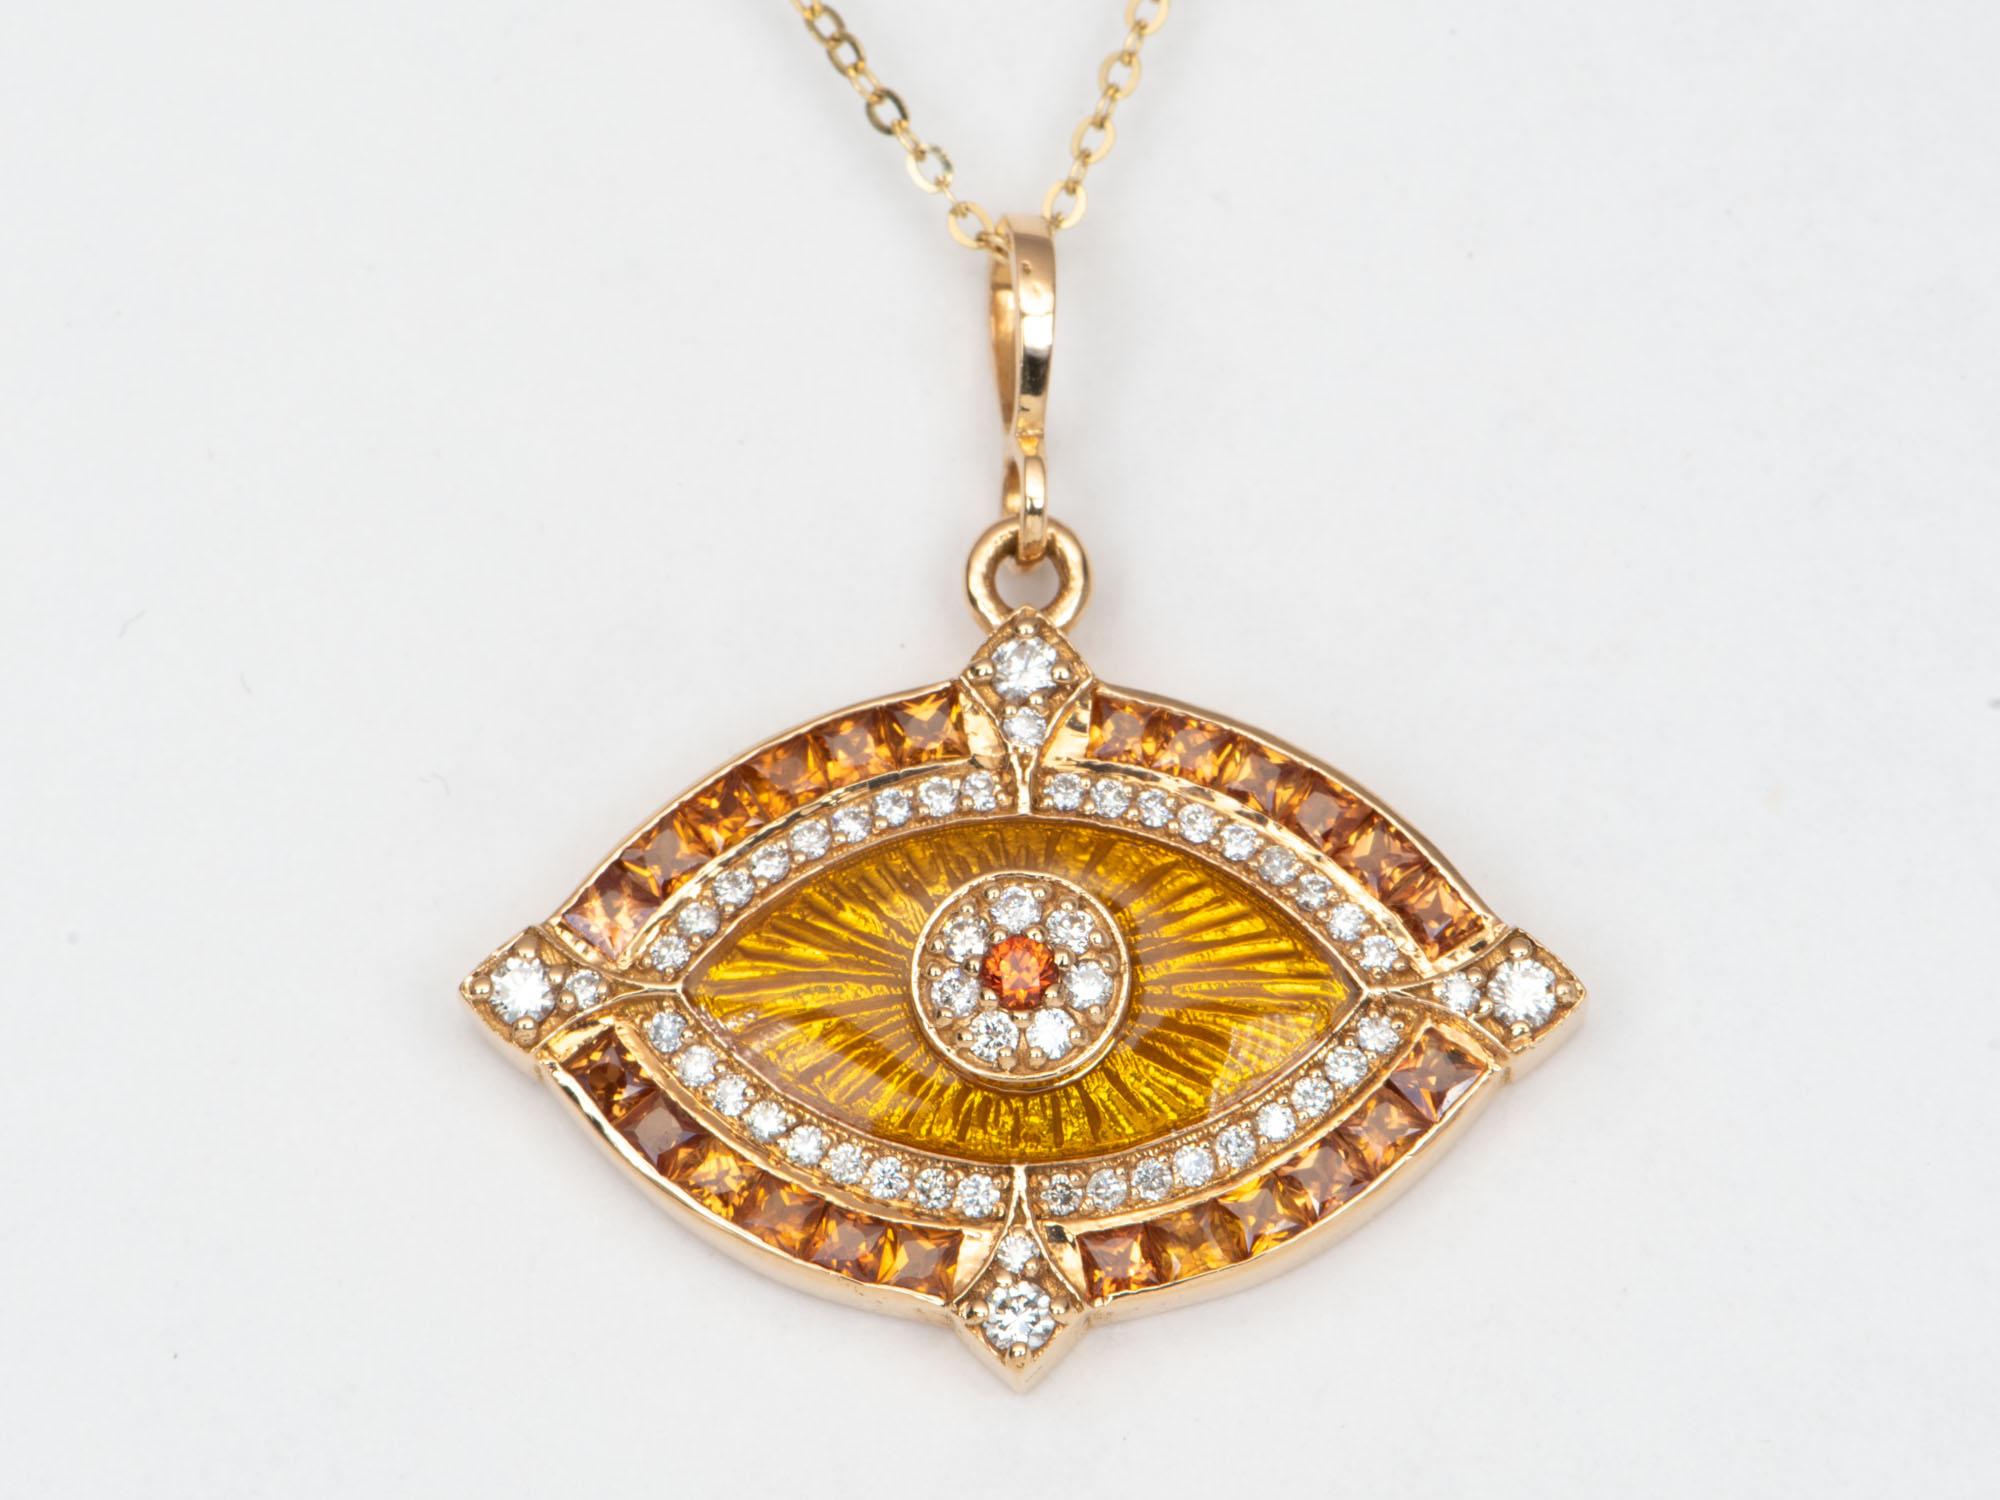 ♥ A solid 18K gold evil eye pendant featuring gorgeous princess-cut orange sapphires and diamonds
♥ This pendant features an inner halo of guilloche enamel
♥ The pendant is hung from a special chain necklace made up from the most unique long